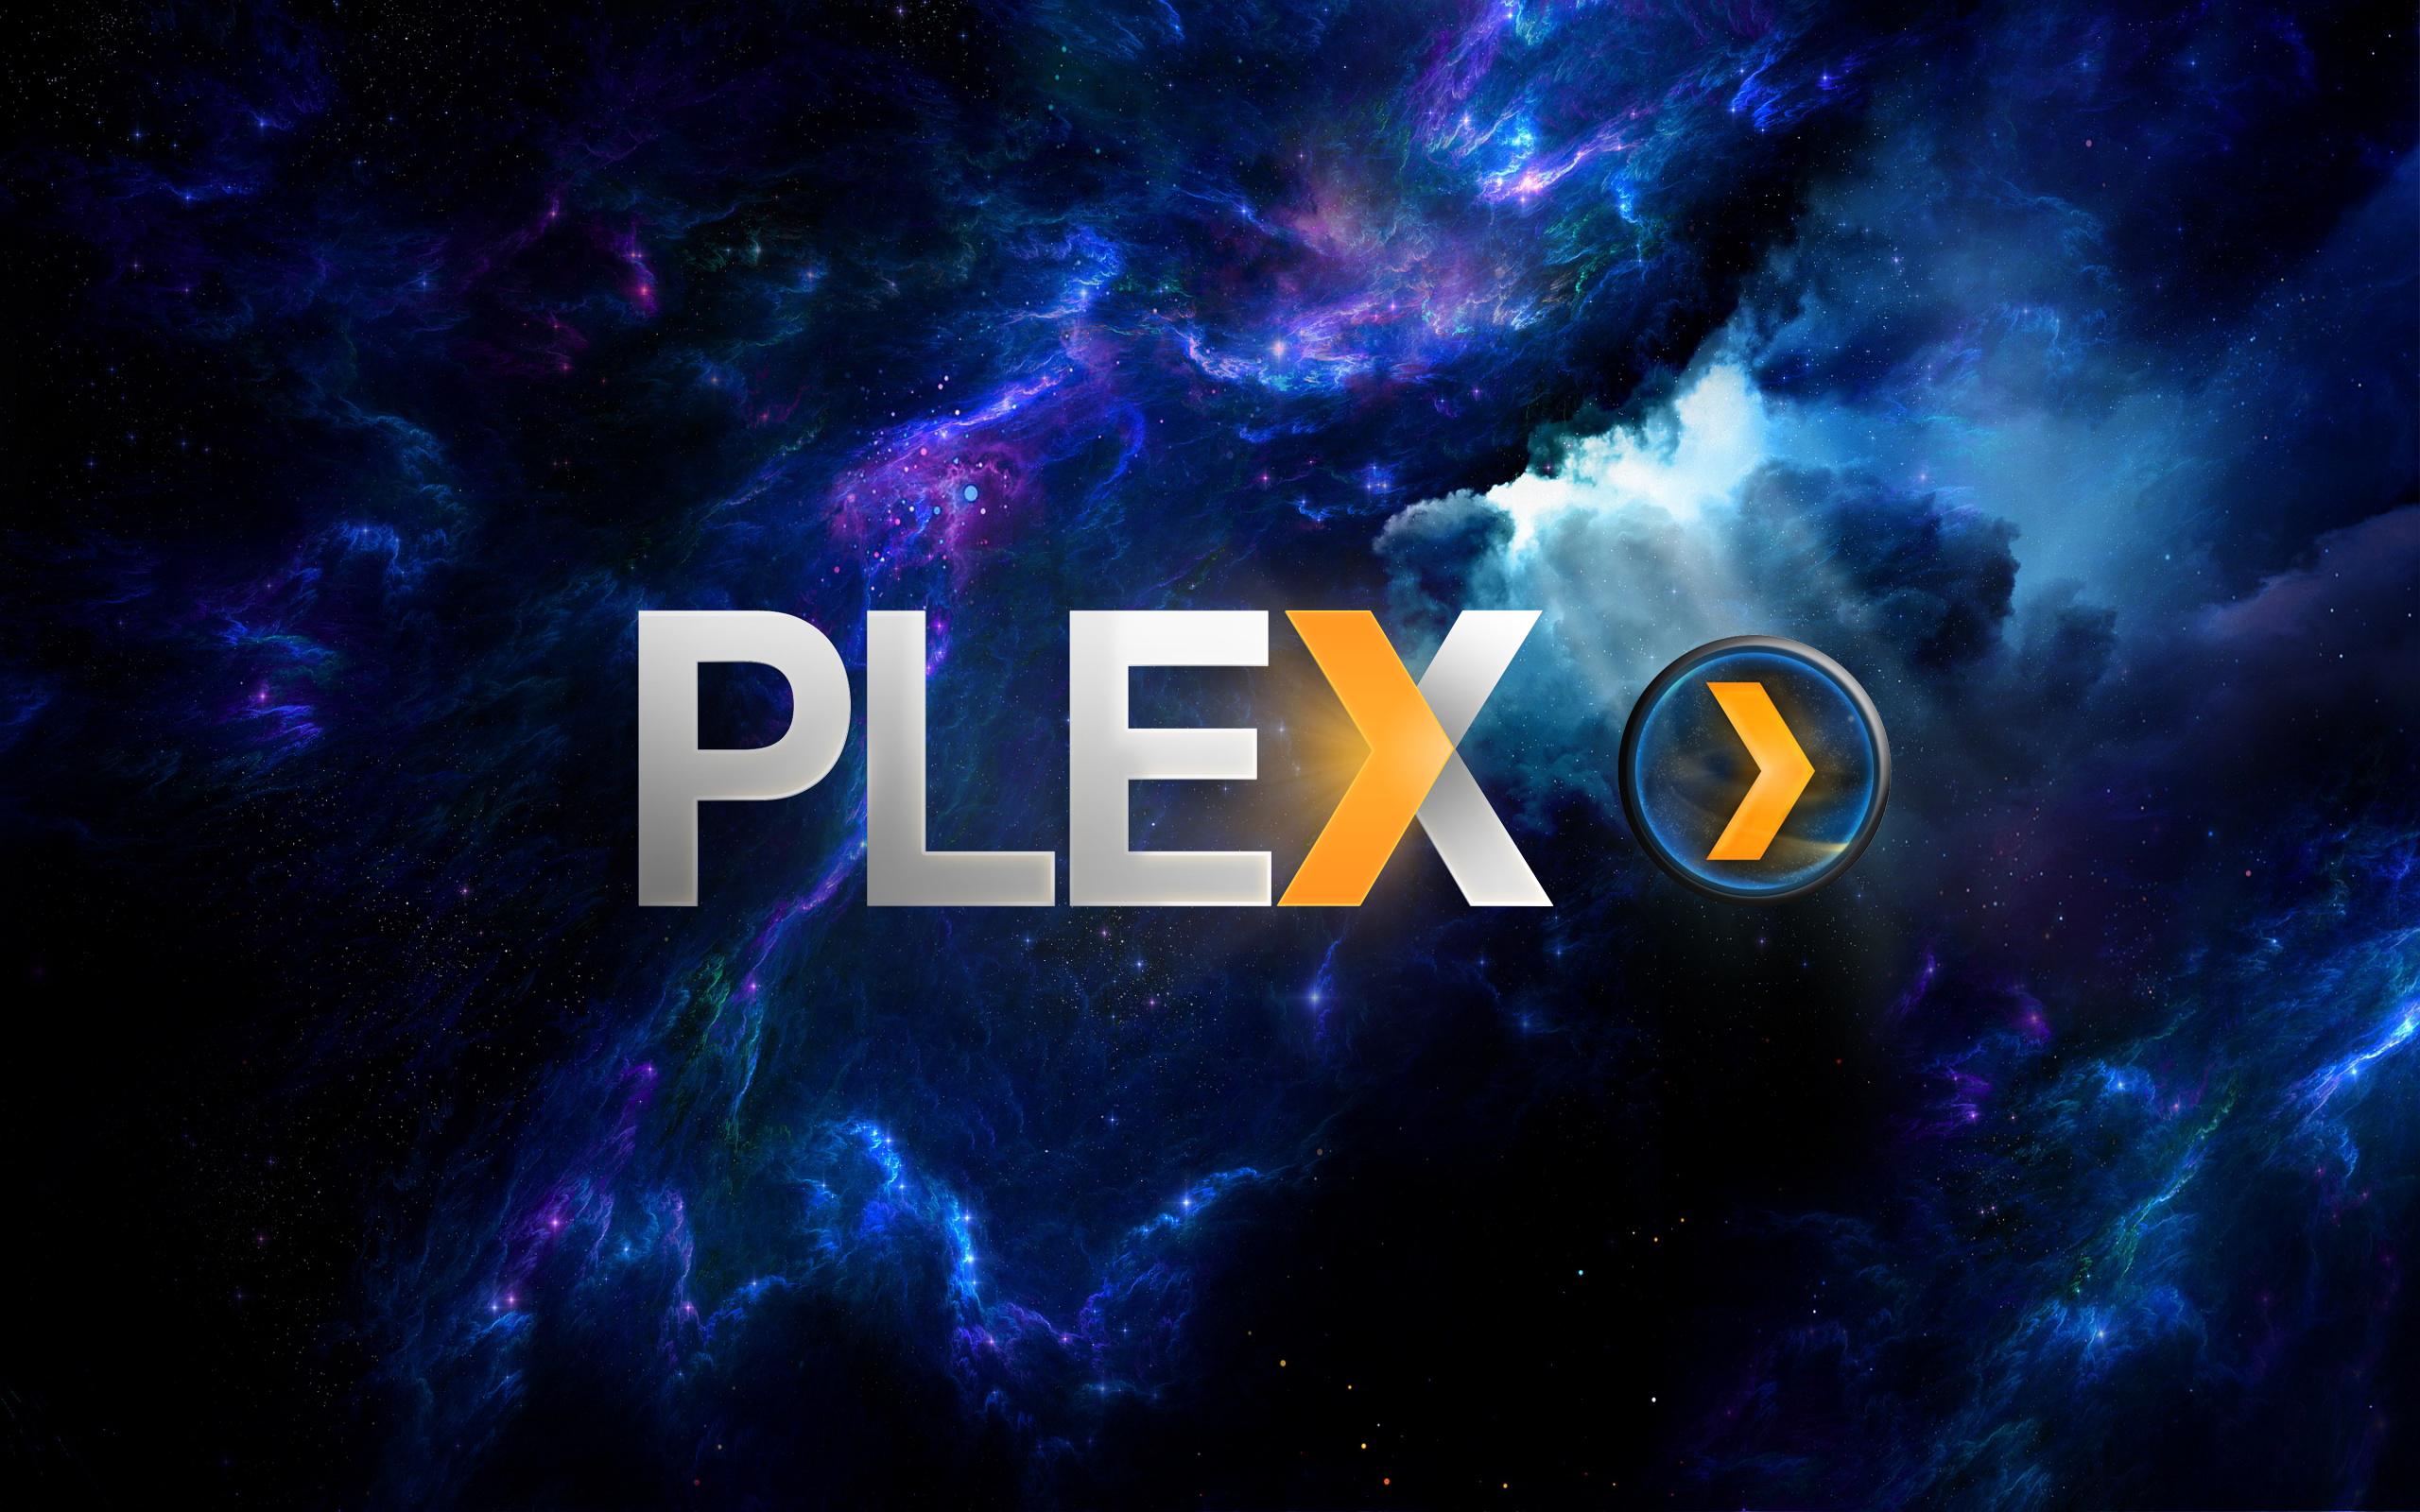 Made a Plex wallpaper, thought I would share